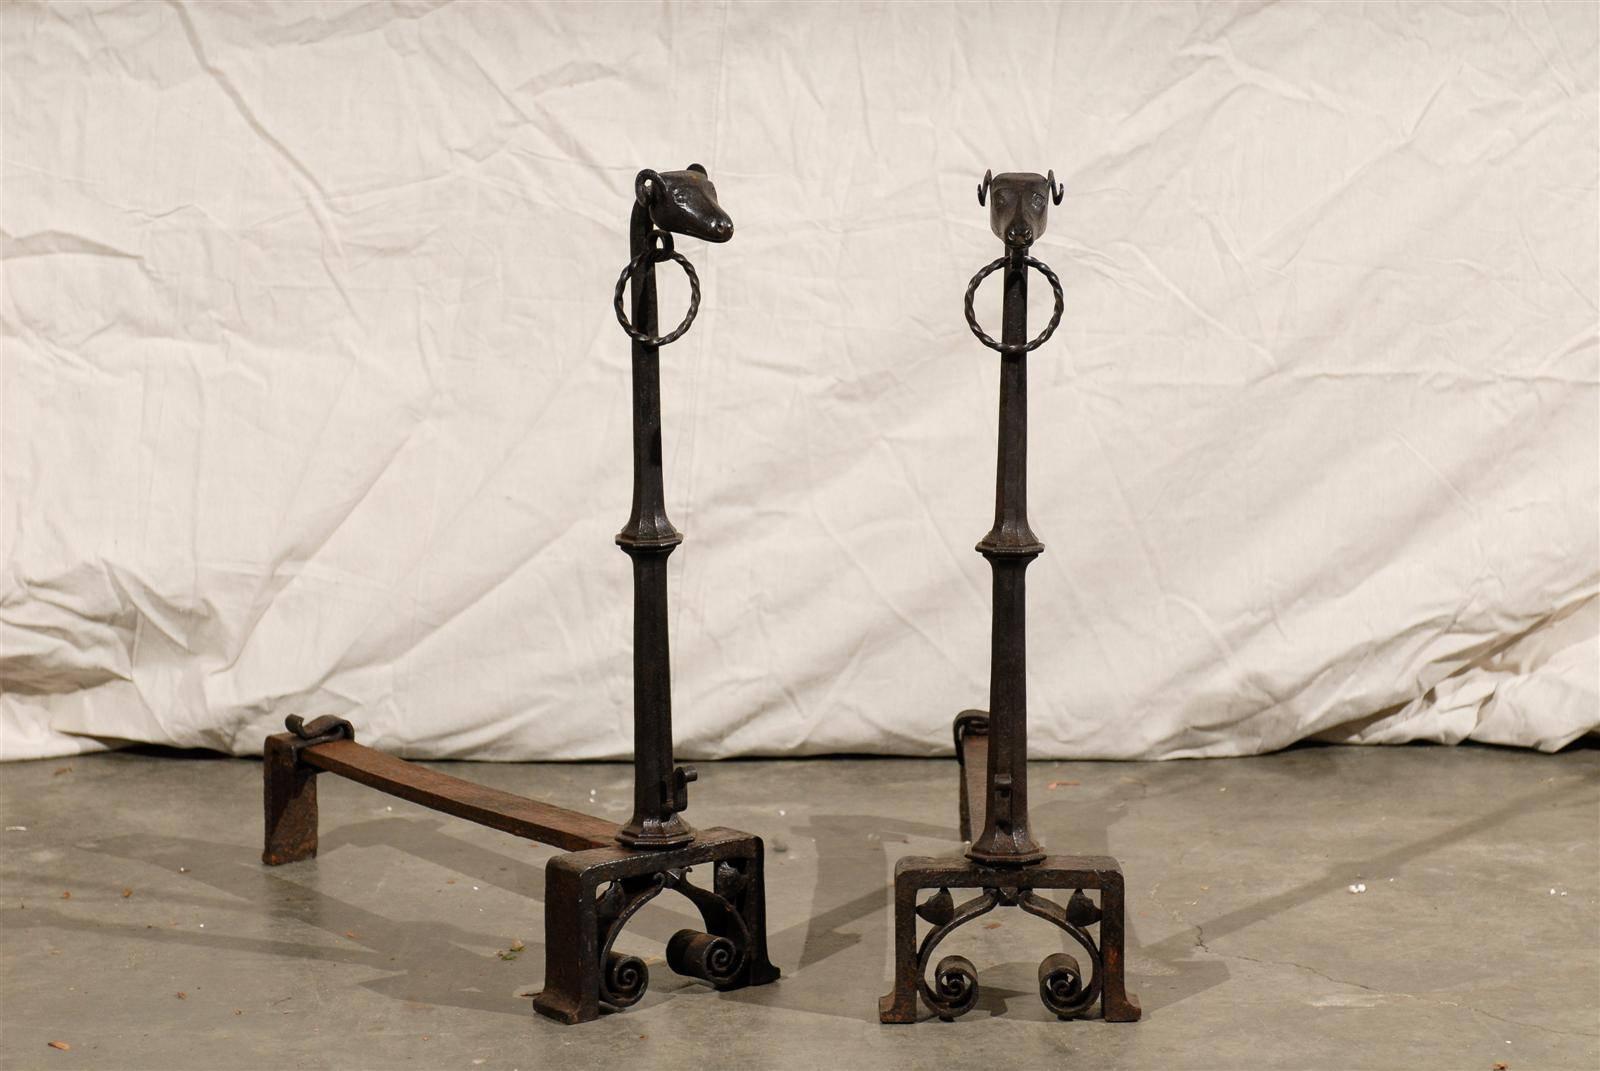 Pair of 19th Century Cast Iron Rams Head Iron Andirons with scrolled base
In the style of Giacometti 